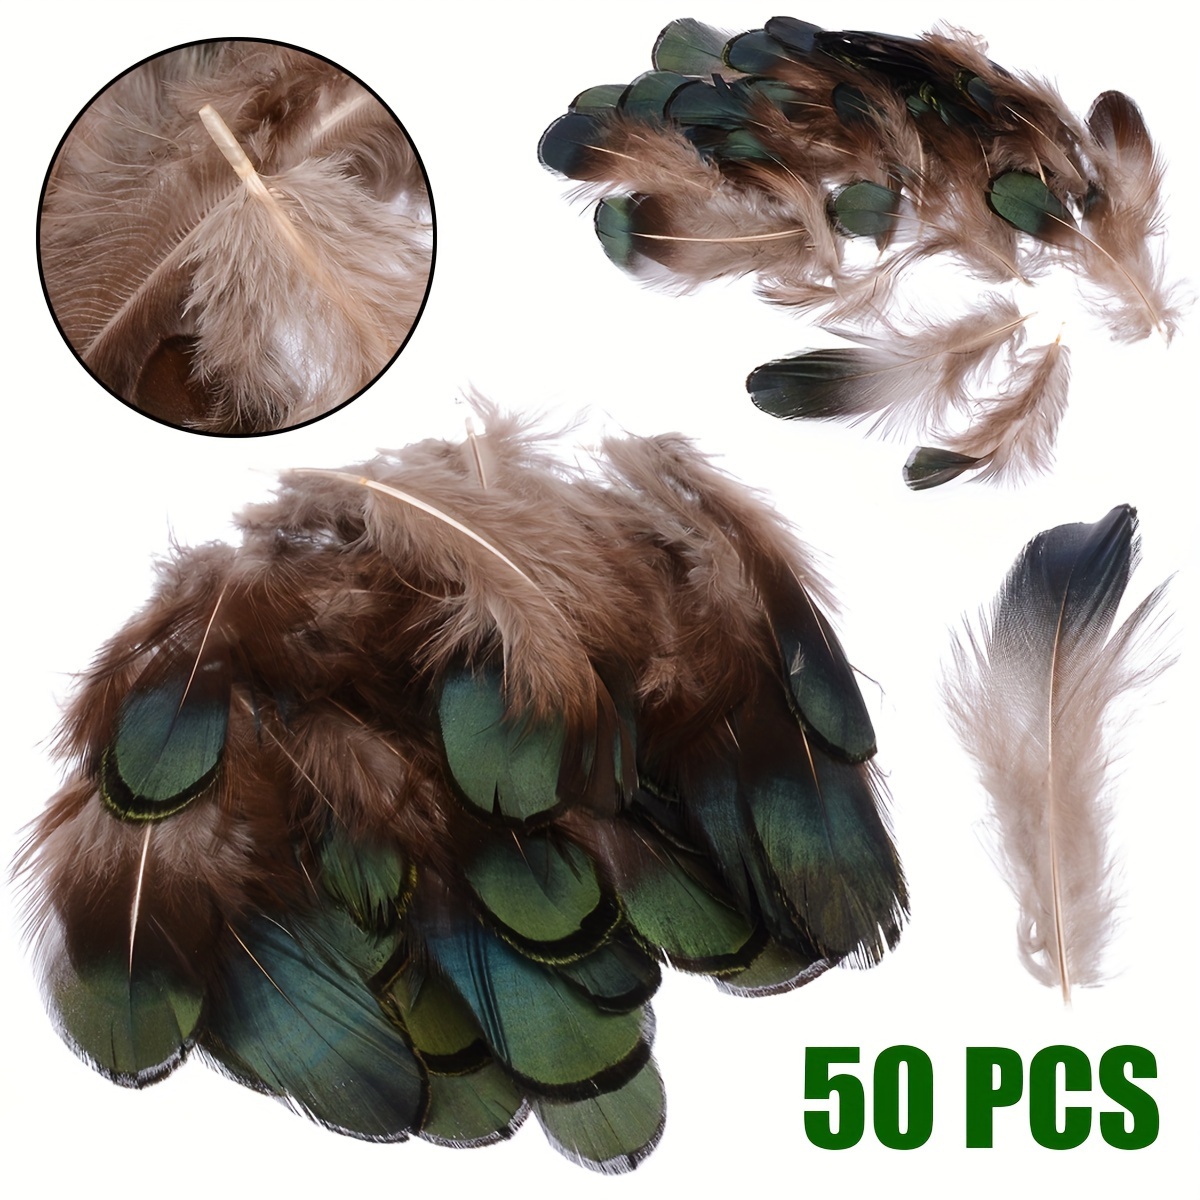 40pcs Natural Pheasant Feathers, Spotted Feathers, Turkey Feathers, 4  Styles Feathers for Crafts DIY Hat Floral Arrangements Wing Quill Wedding  Home